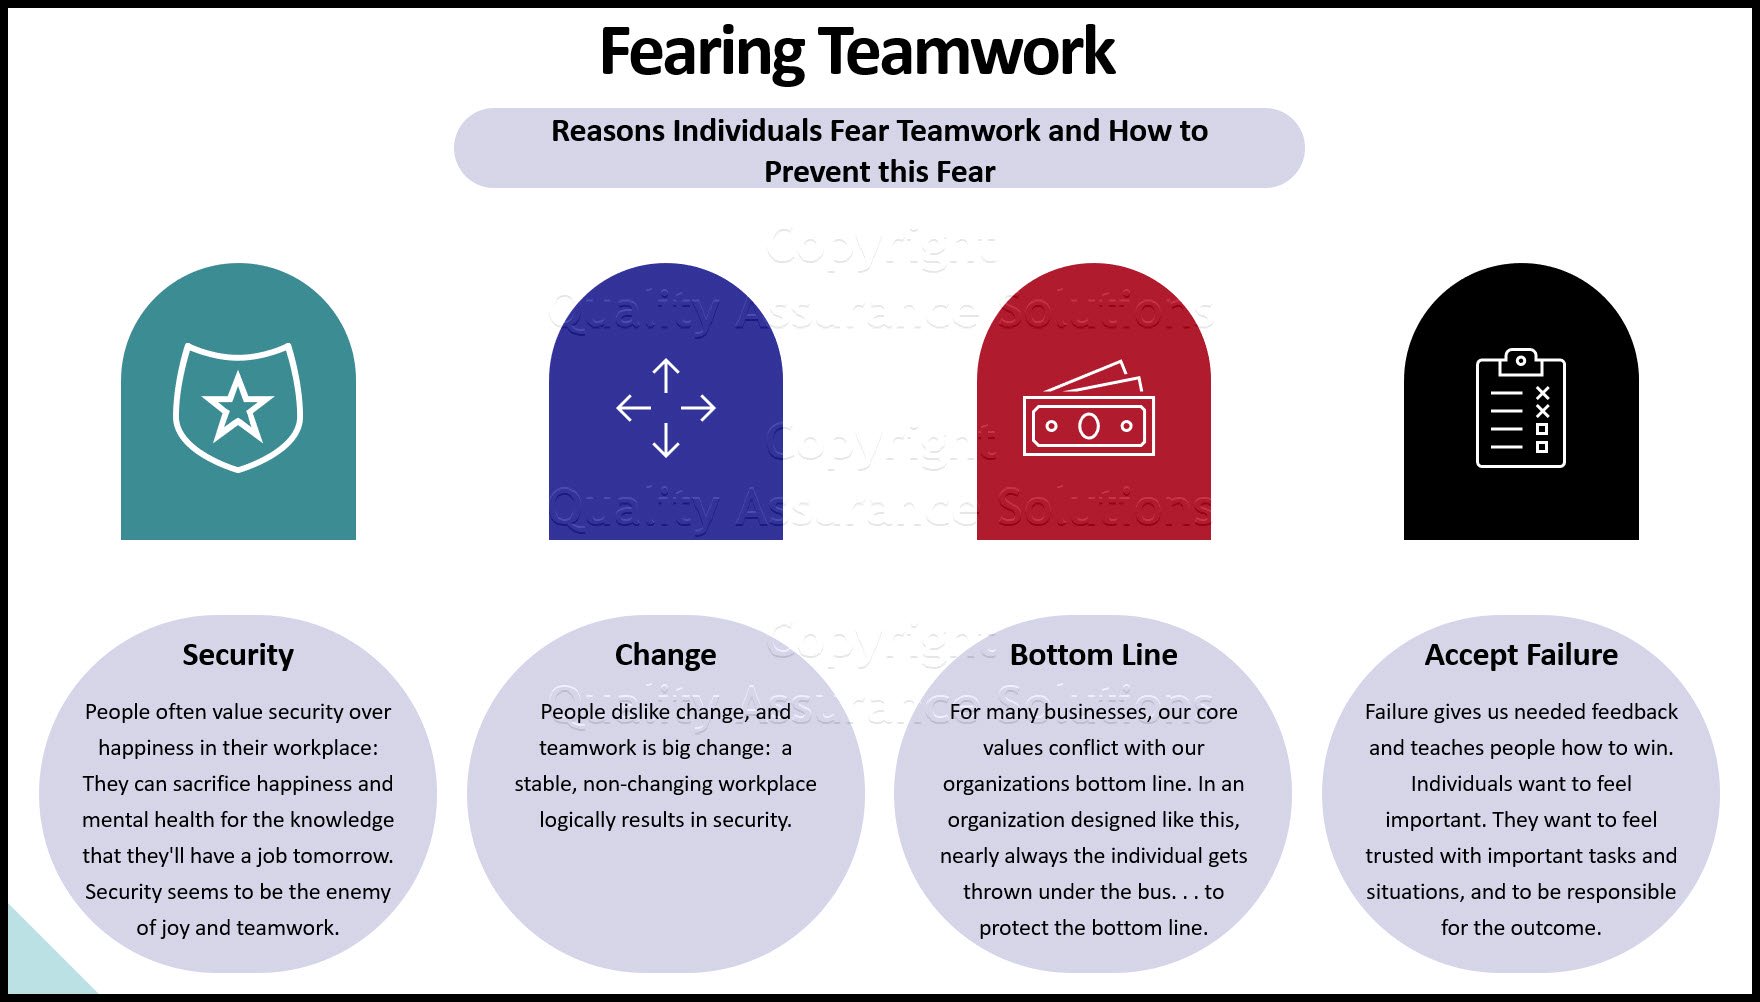 Establish teamwork in the workplace, how to root your team on trust, utilize talents, and create a workplace that performs under pressure and has fun.